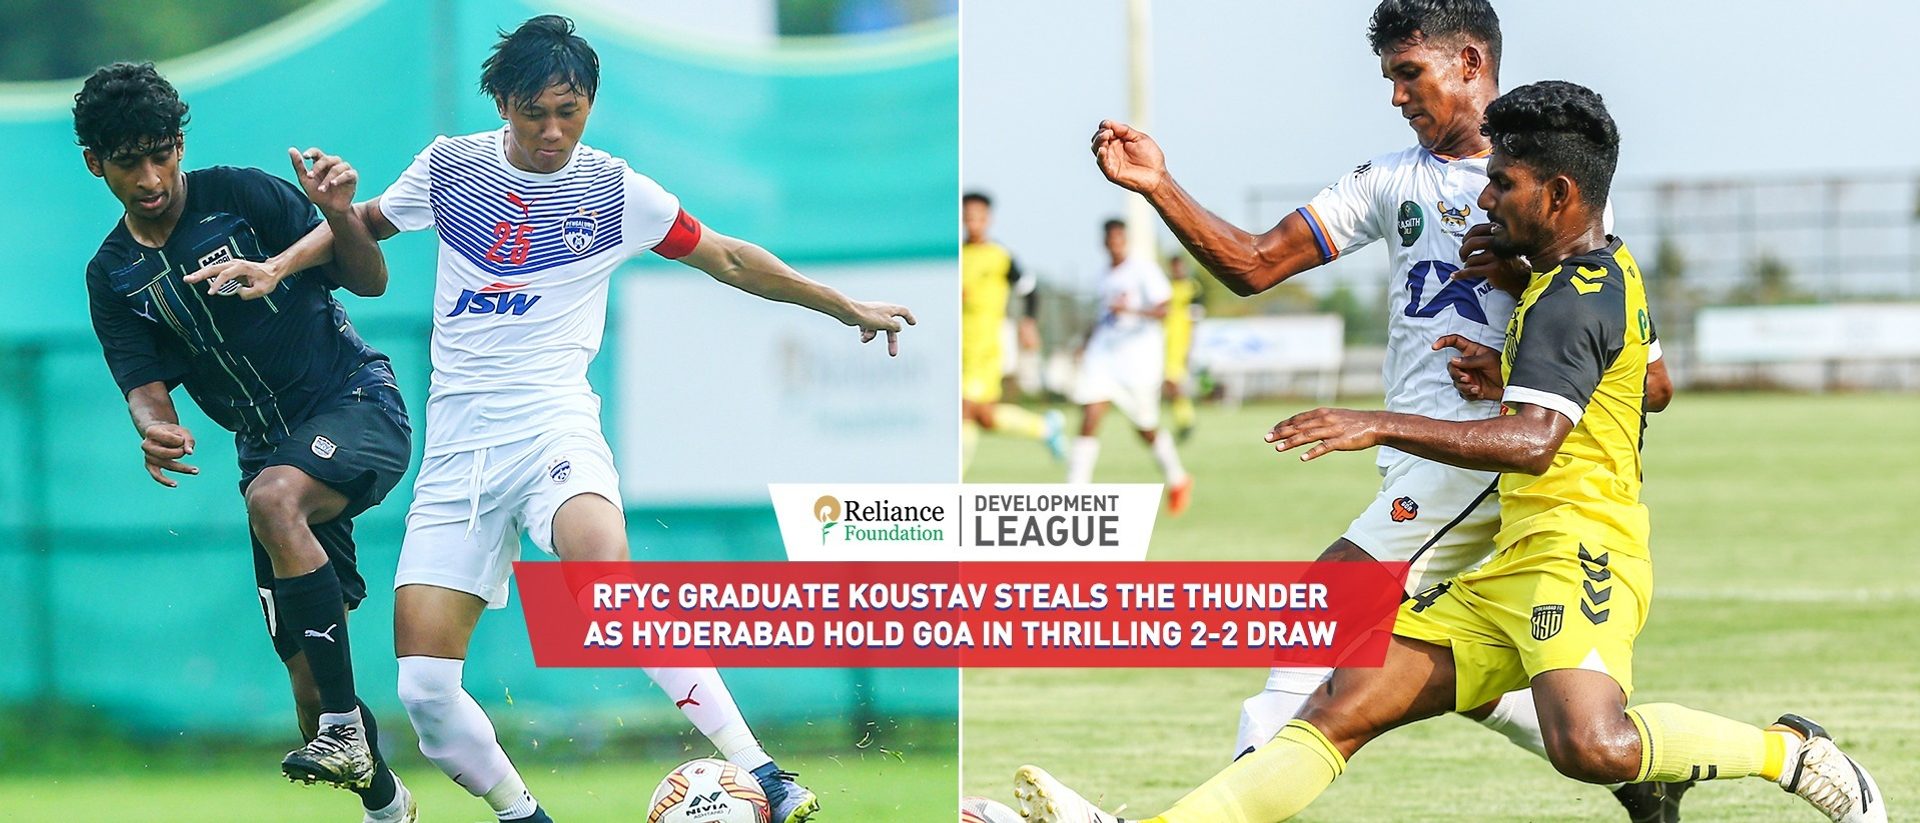 RFYC graduate Koustav steals the thunder as Hyderabad hold Goa in thrilling 2-2 draw